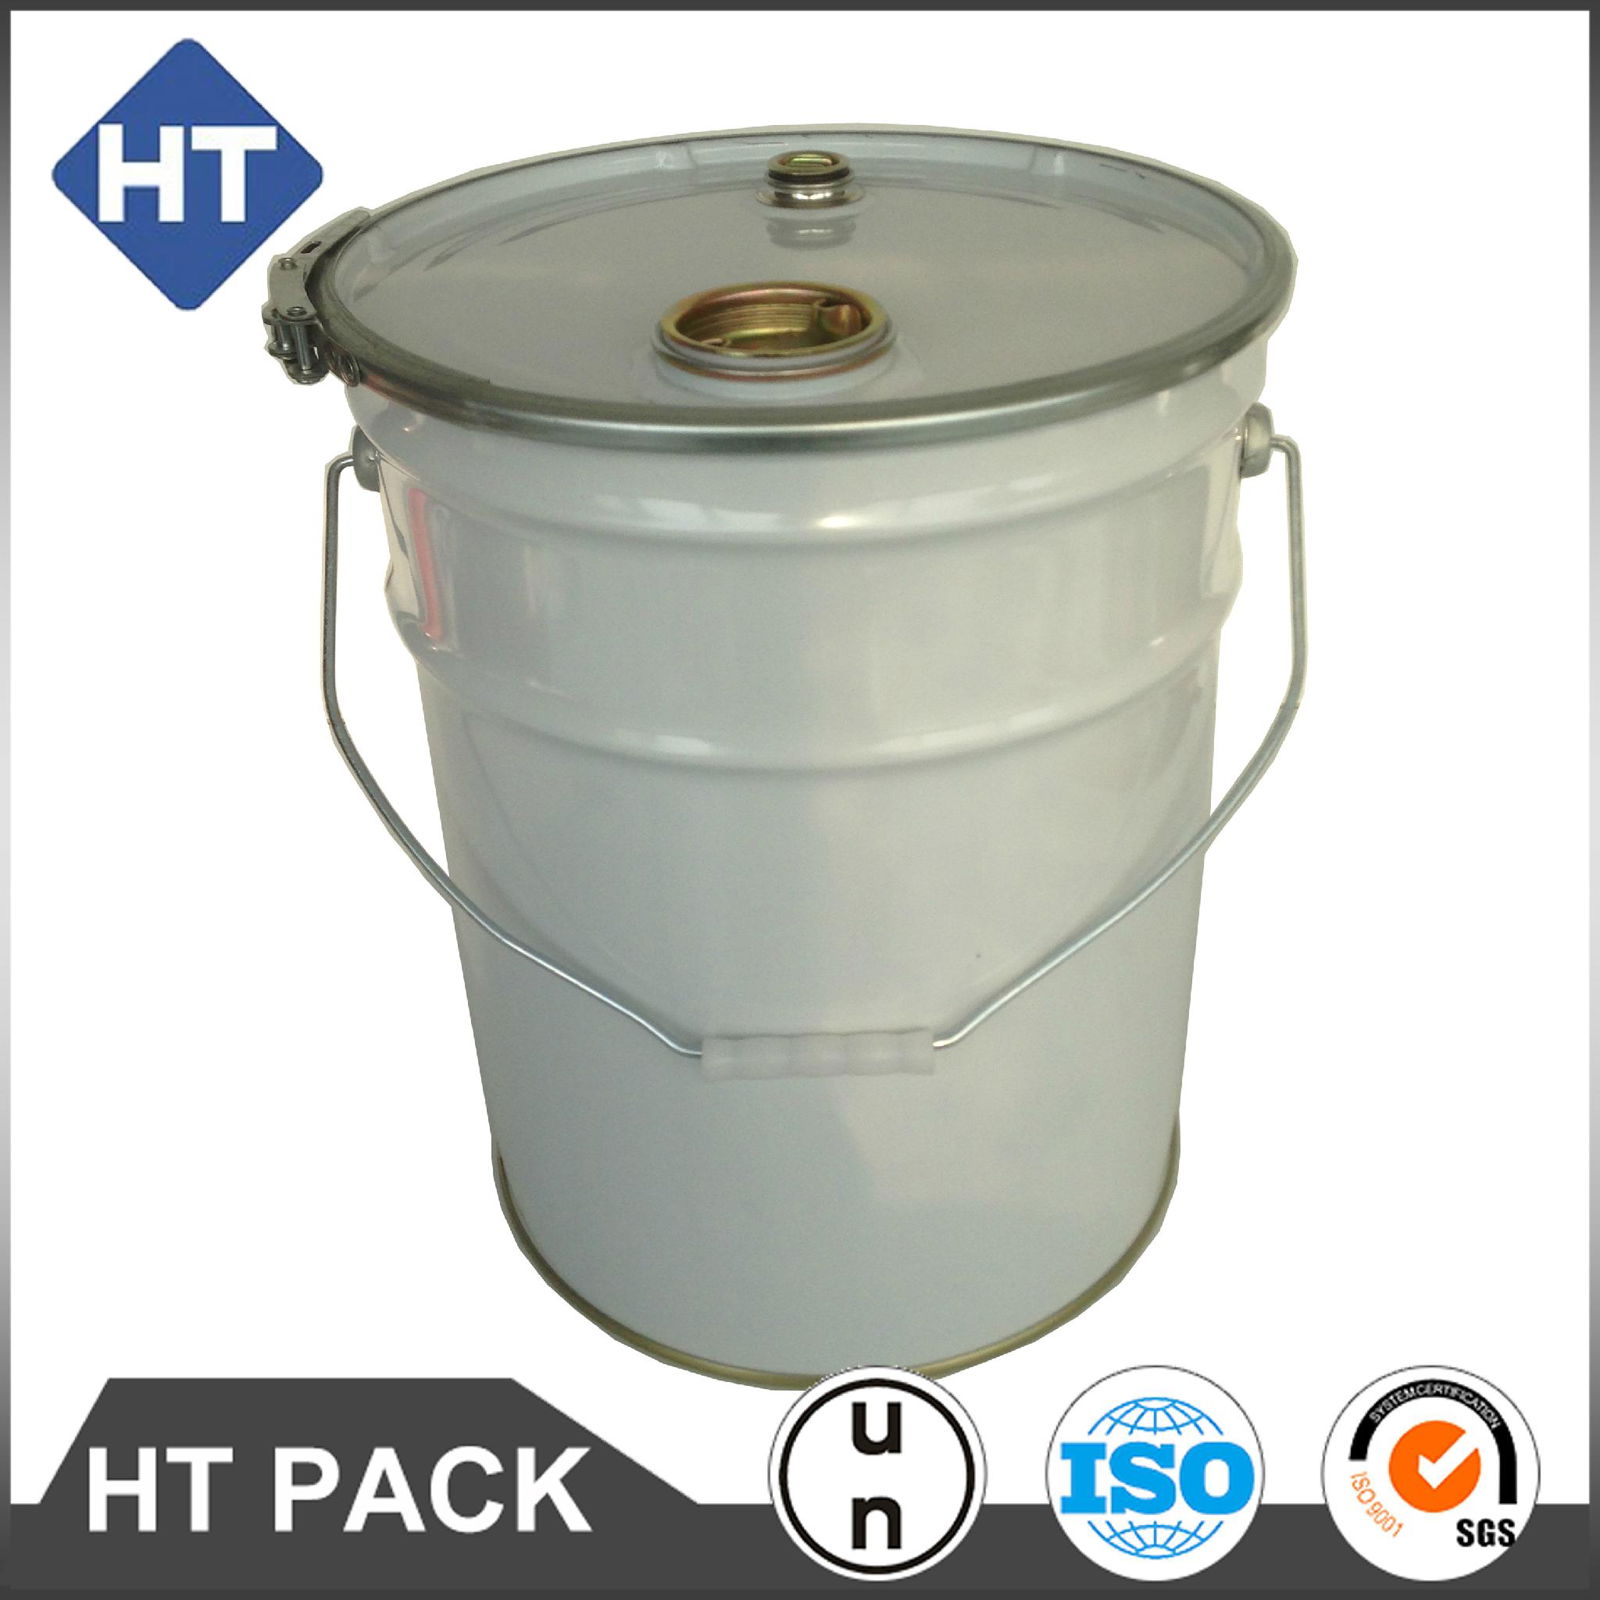 Download 20 Liter Tinplate Paint Bucket Or 20l Paint Drum Or Metal Container 20lpb Ht China Trading Company Metal Packaging Materials